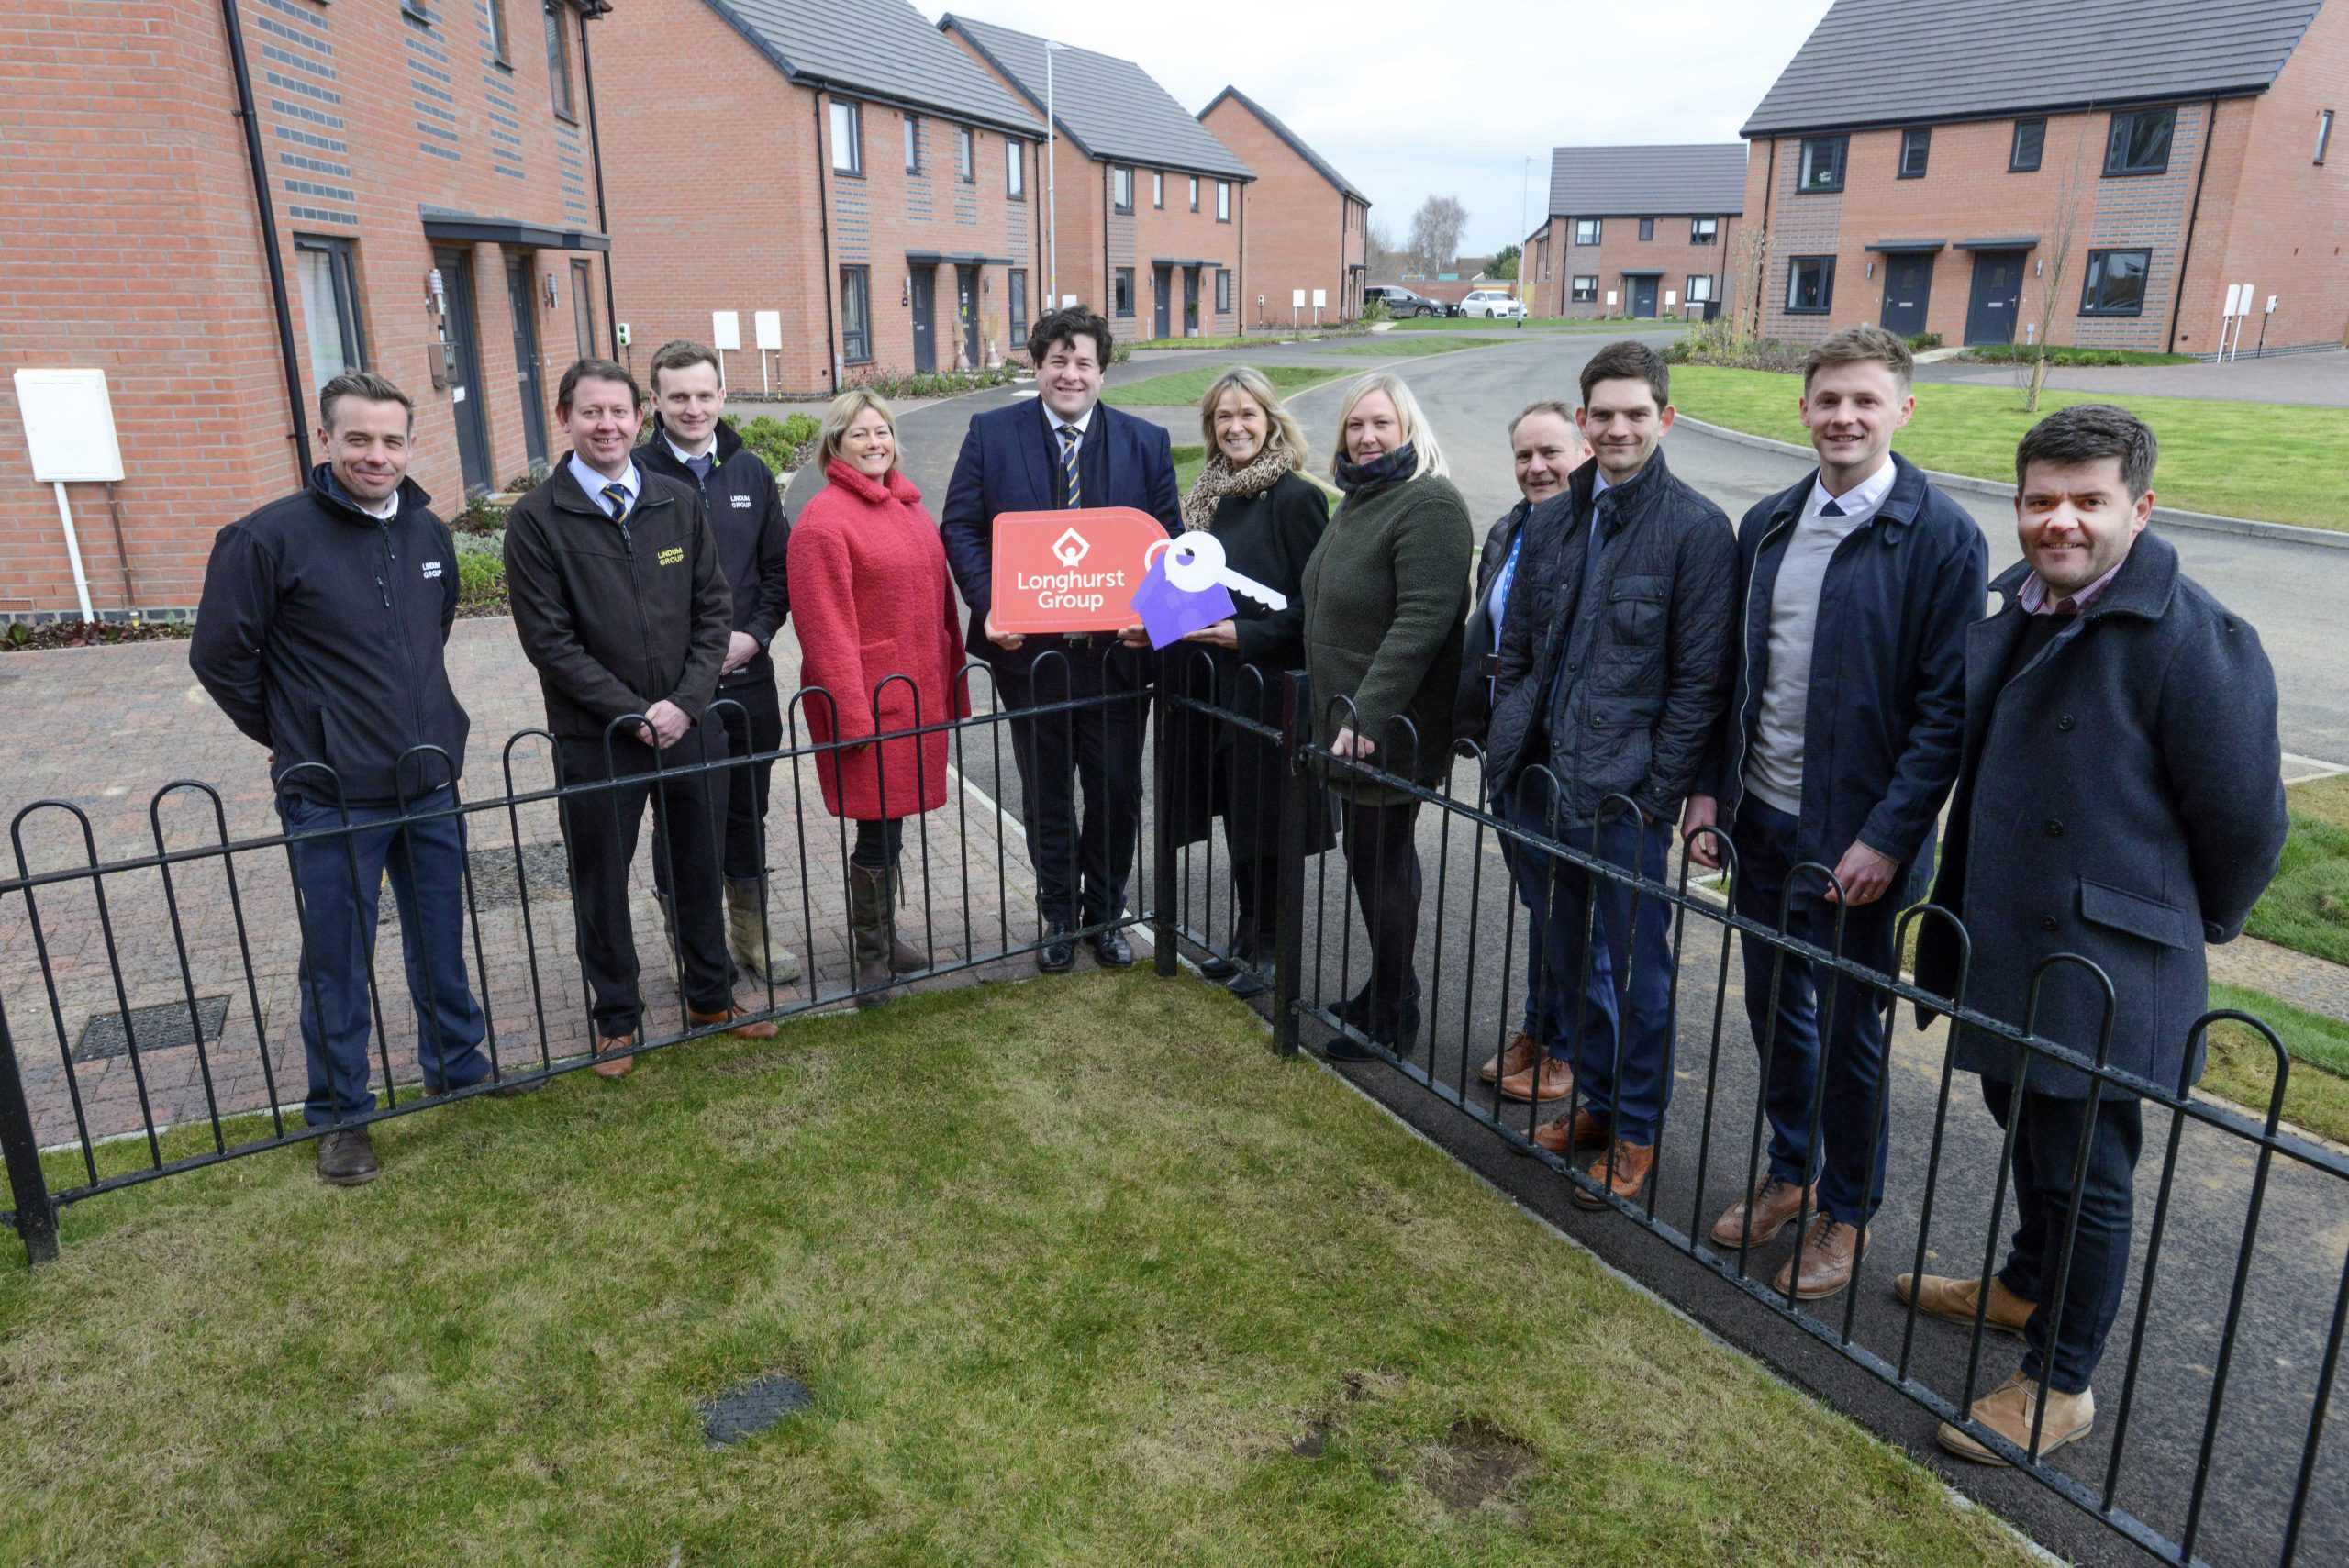 Lindum partners with Longhurst Group to bring more affordable housing to Sleaford